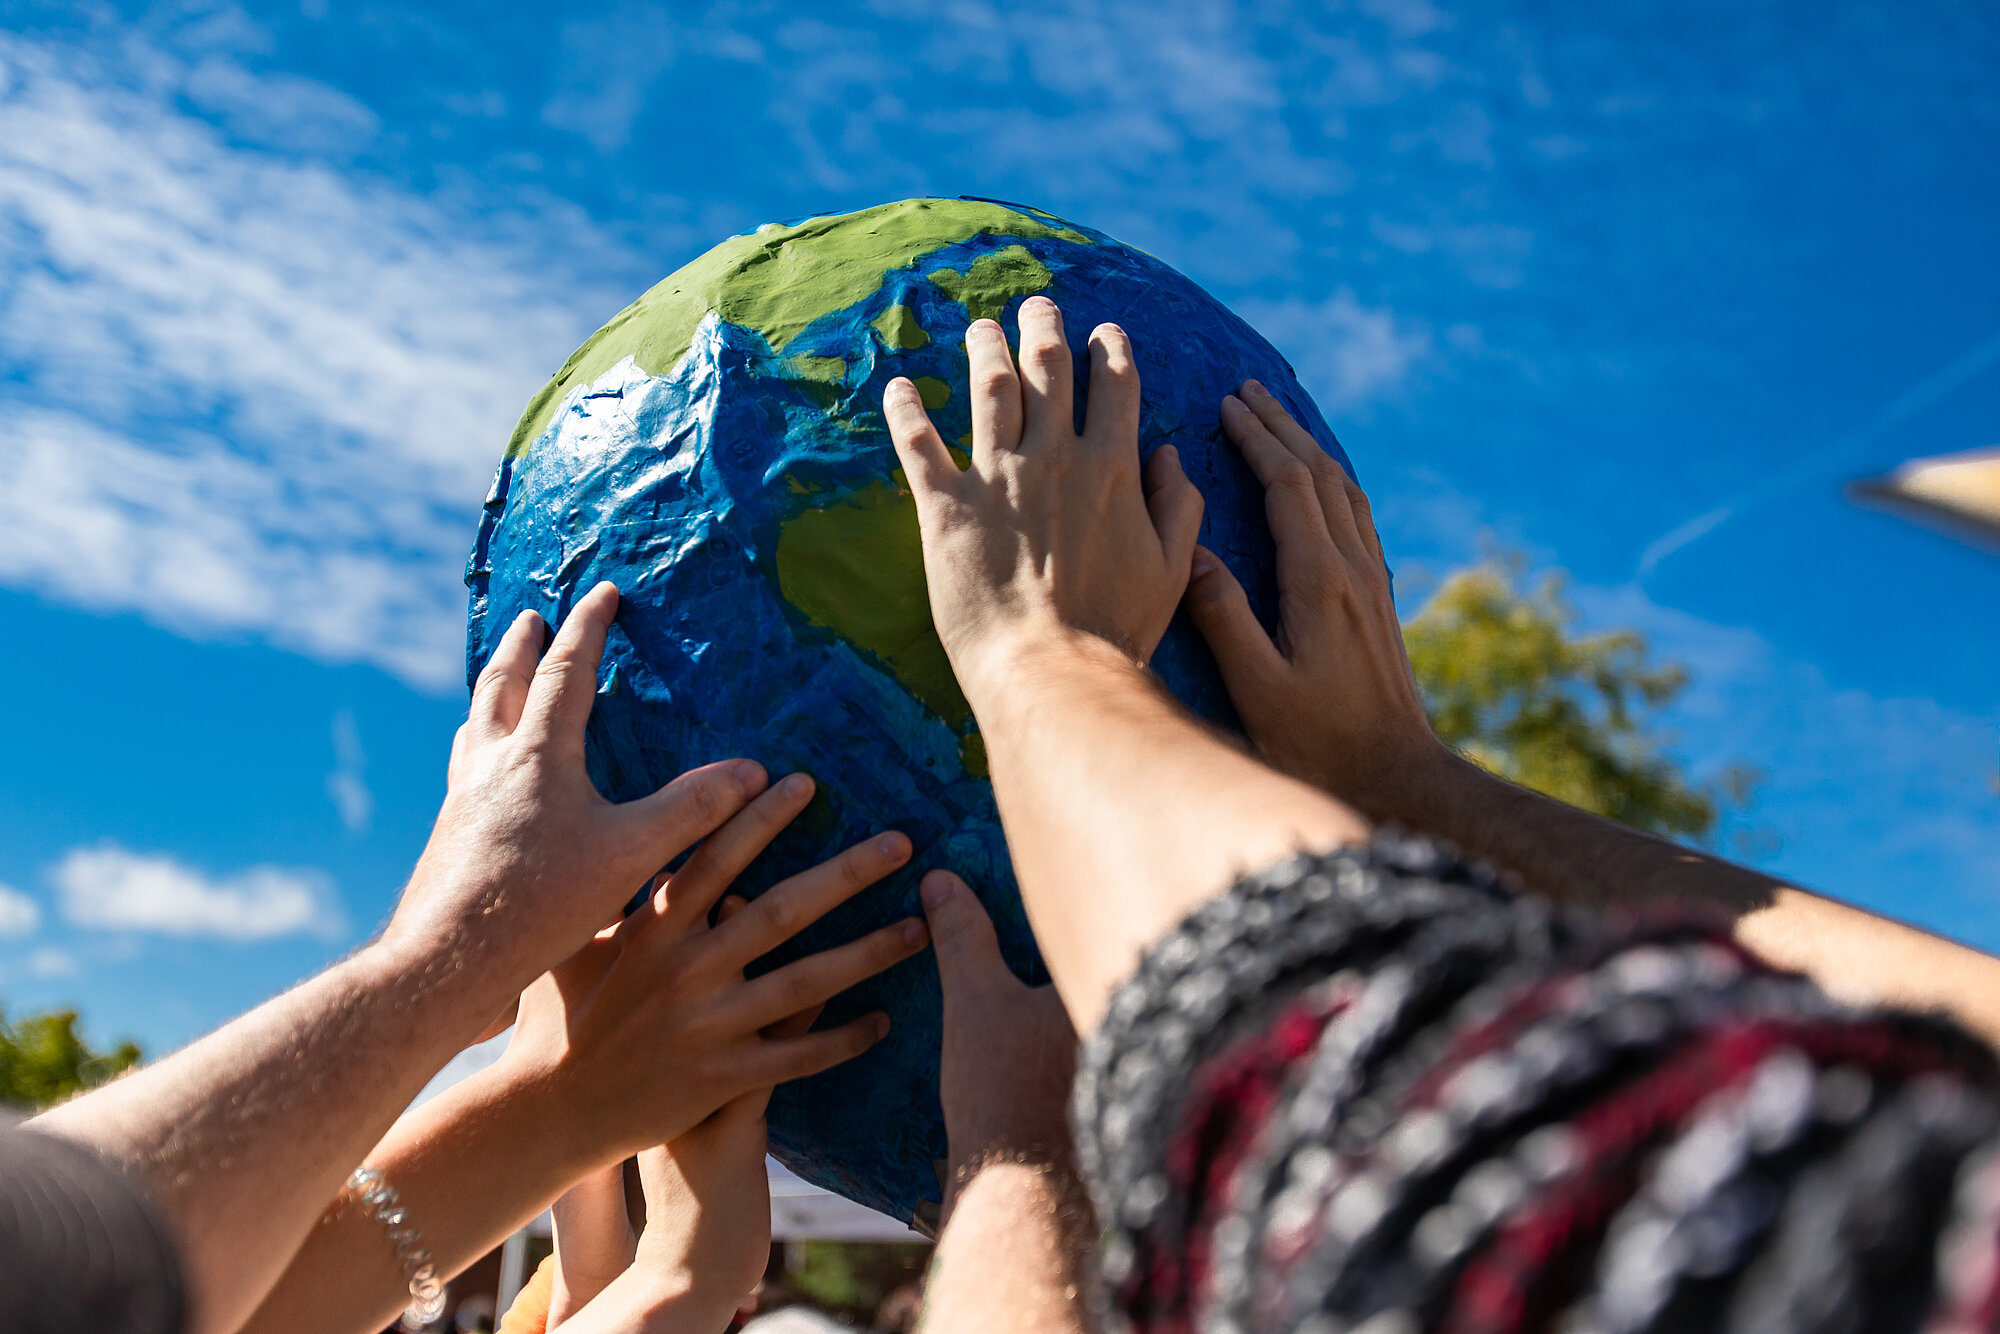 Many hands holding a giant terrestrial globe